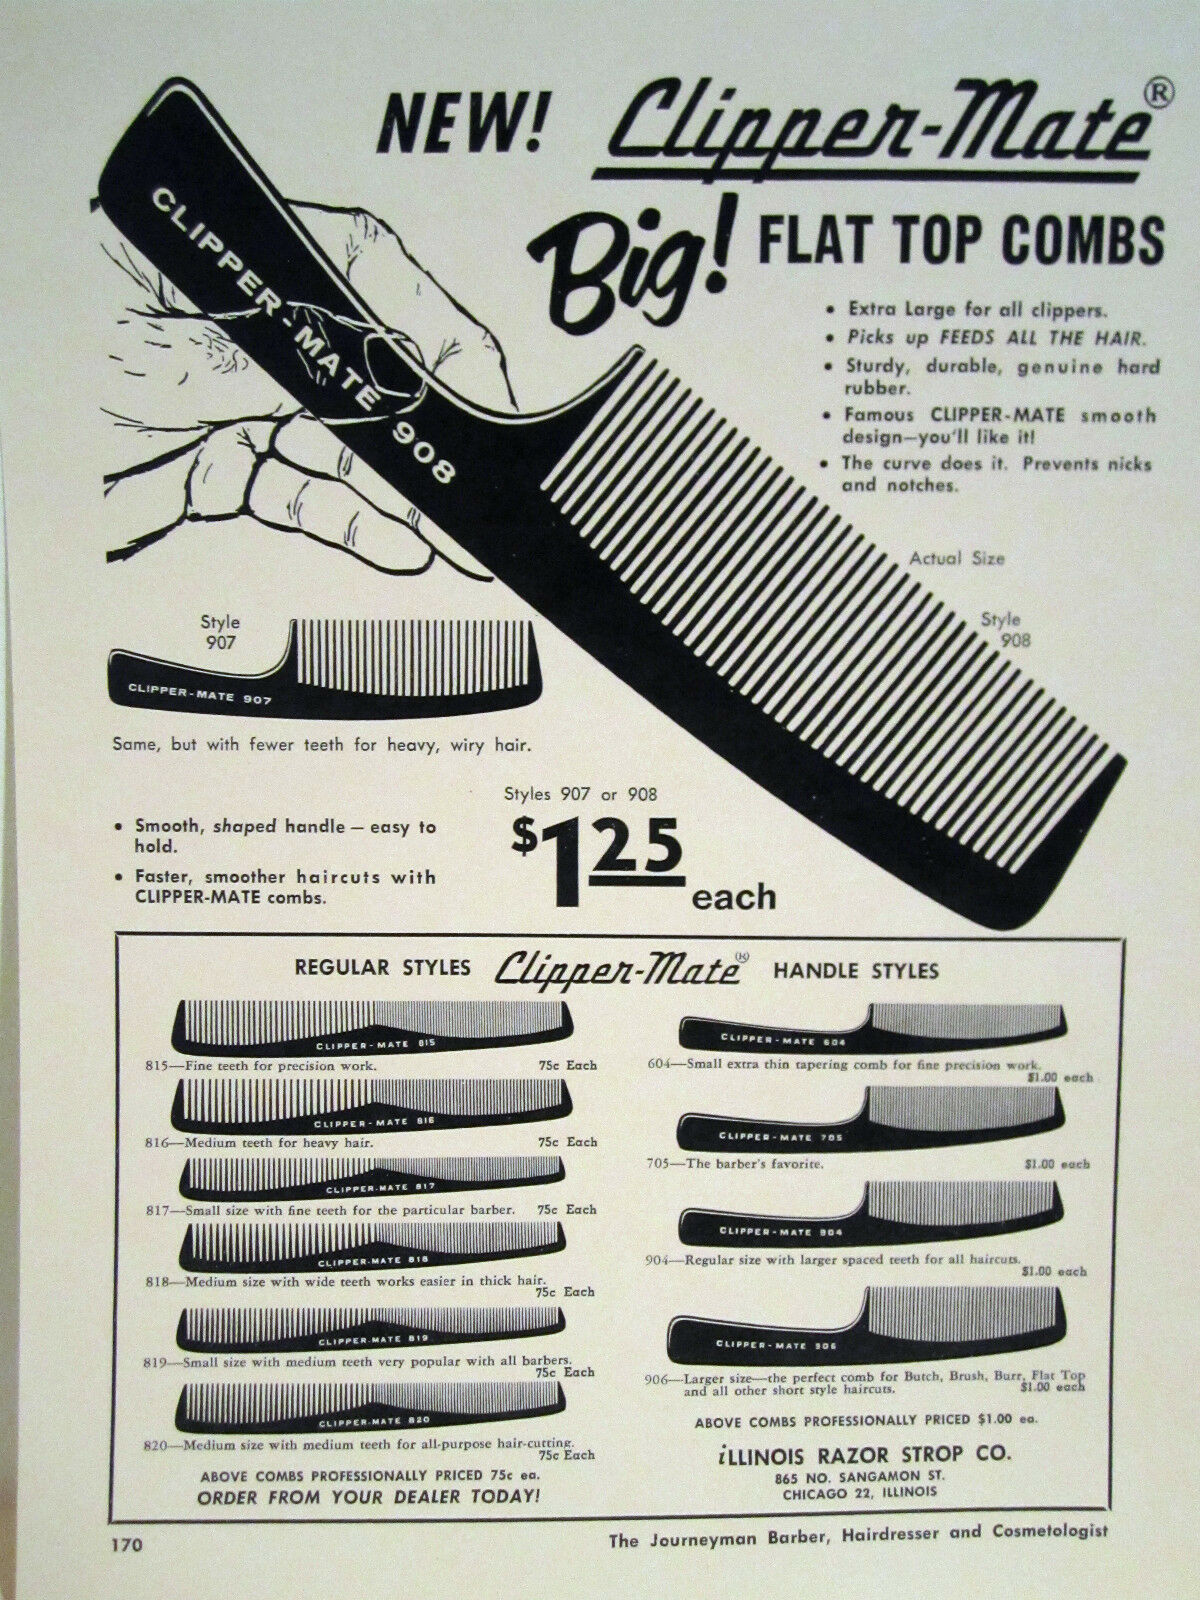 Vintage Barbershop 10 Drawings Of Clipper-mate Combs & Flat Top Sign/ad